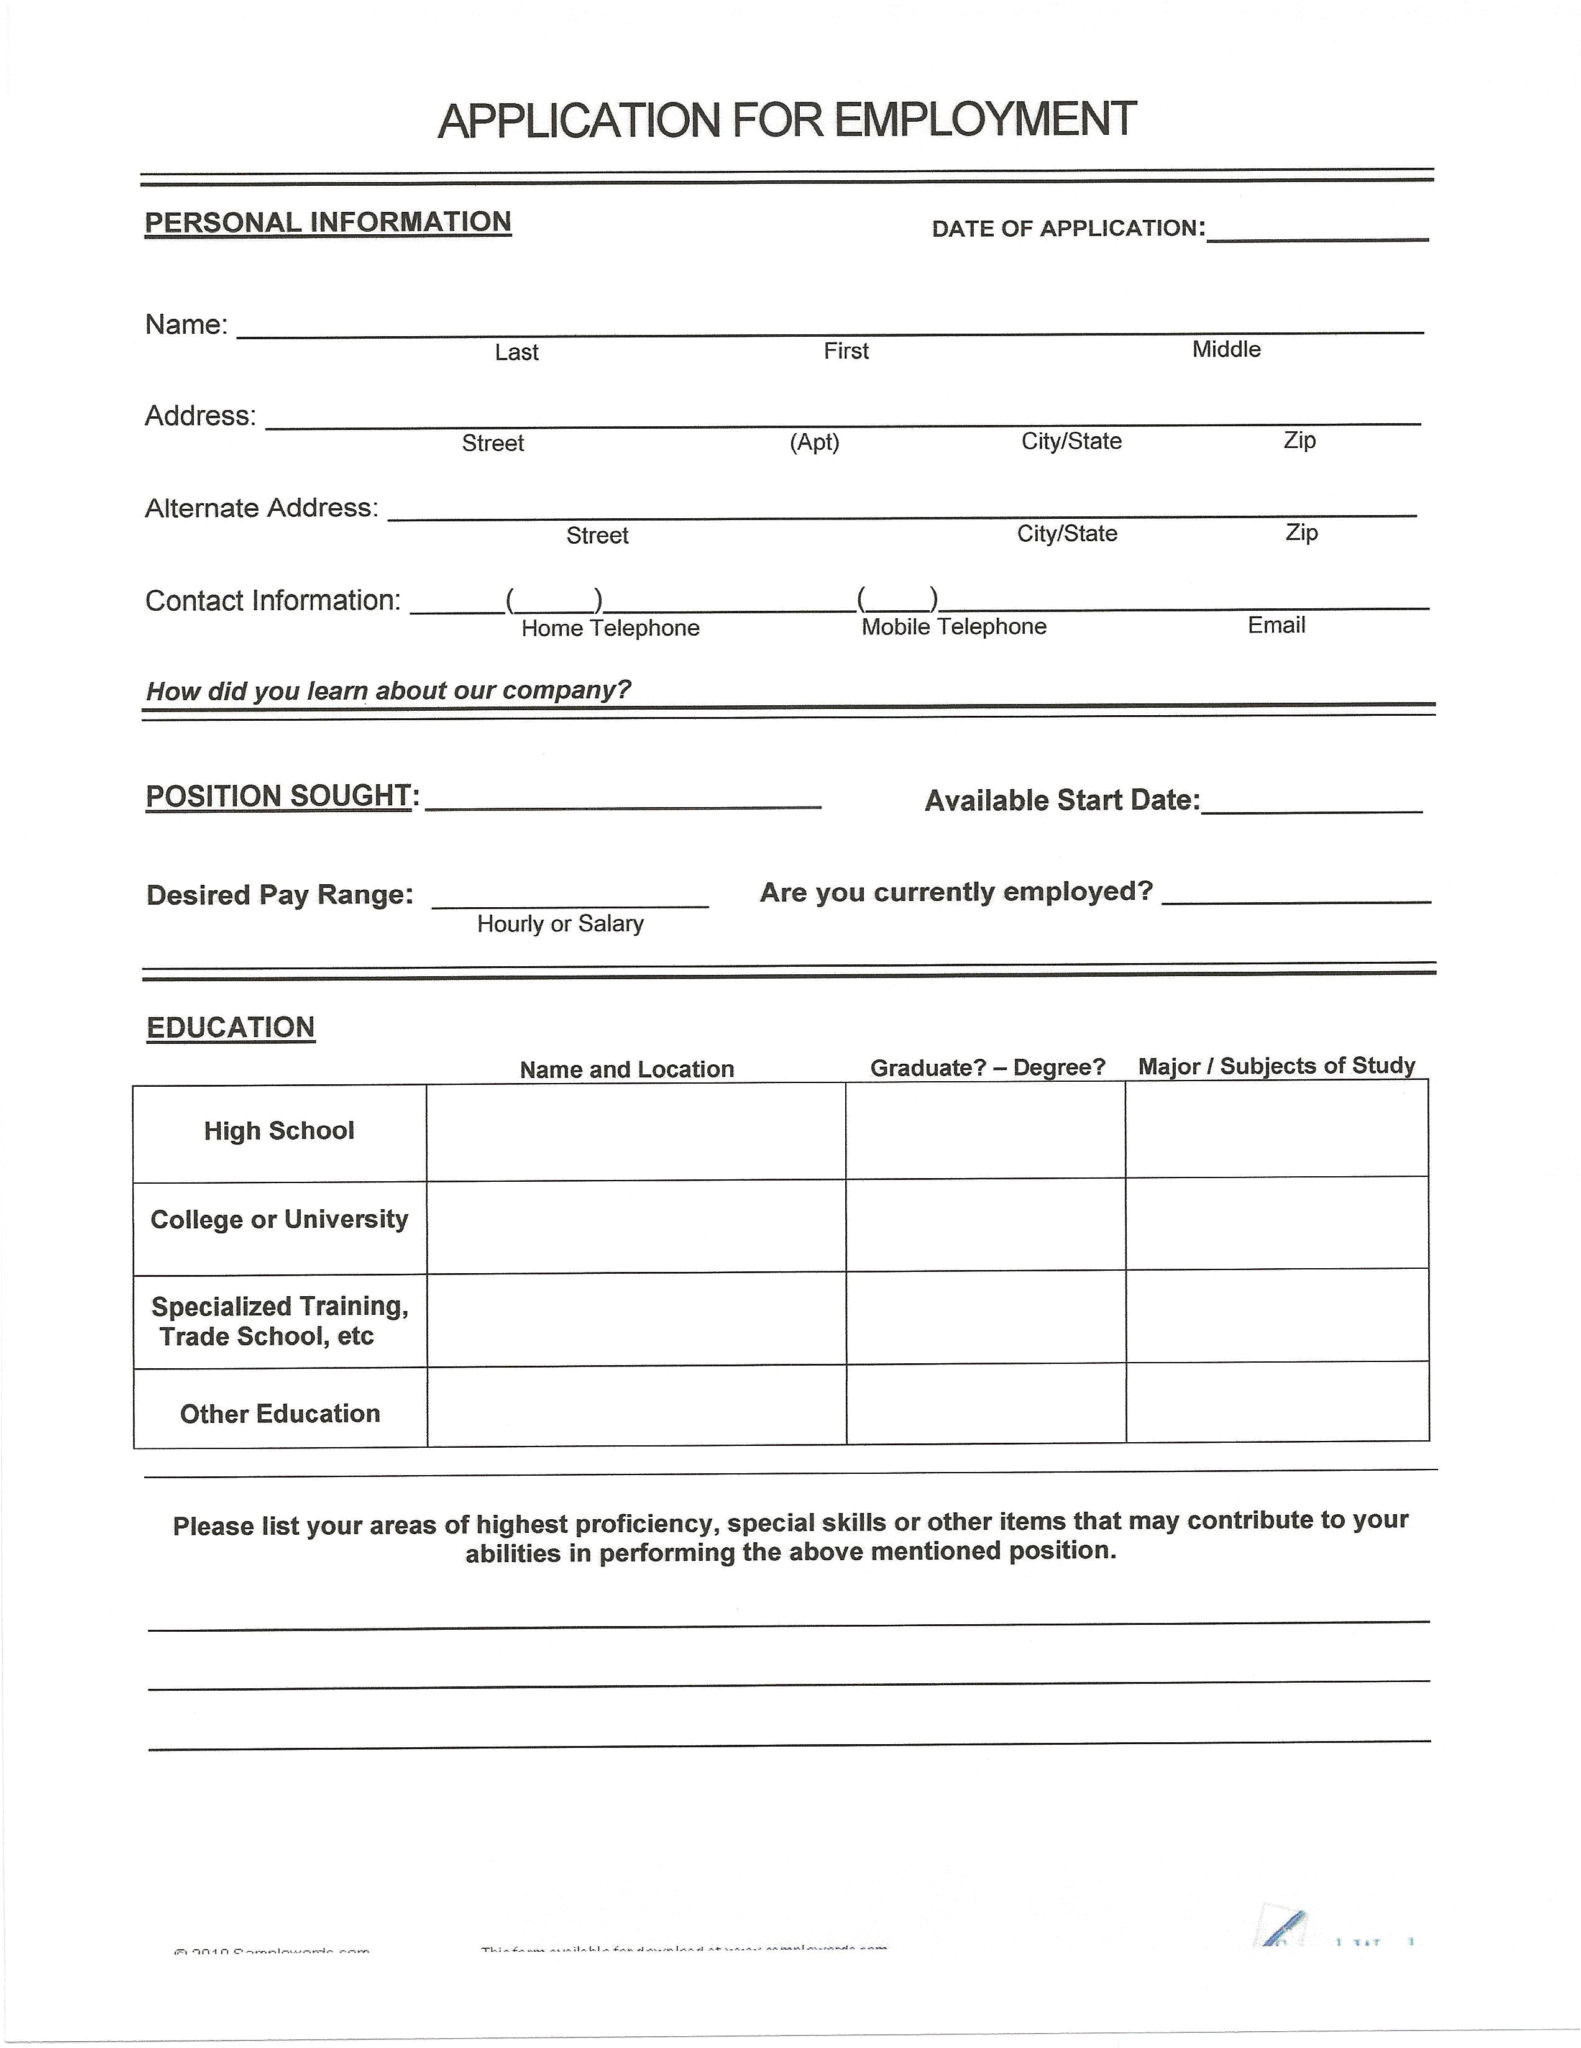 Blank Resume to Fill Out and Print Resume format Blank Resume form to Fill Out